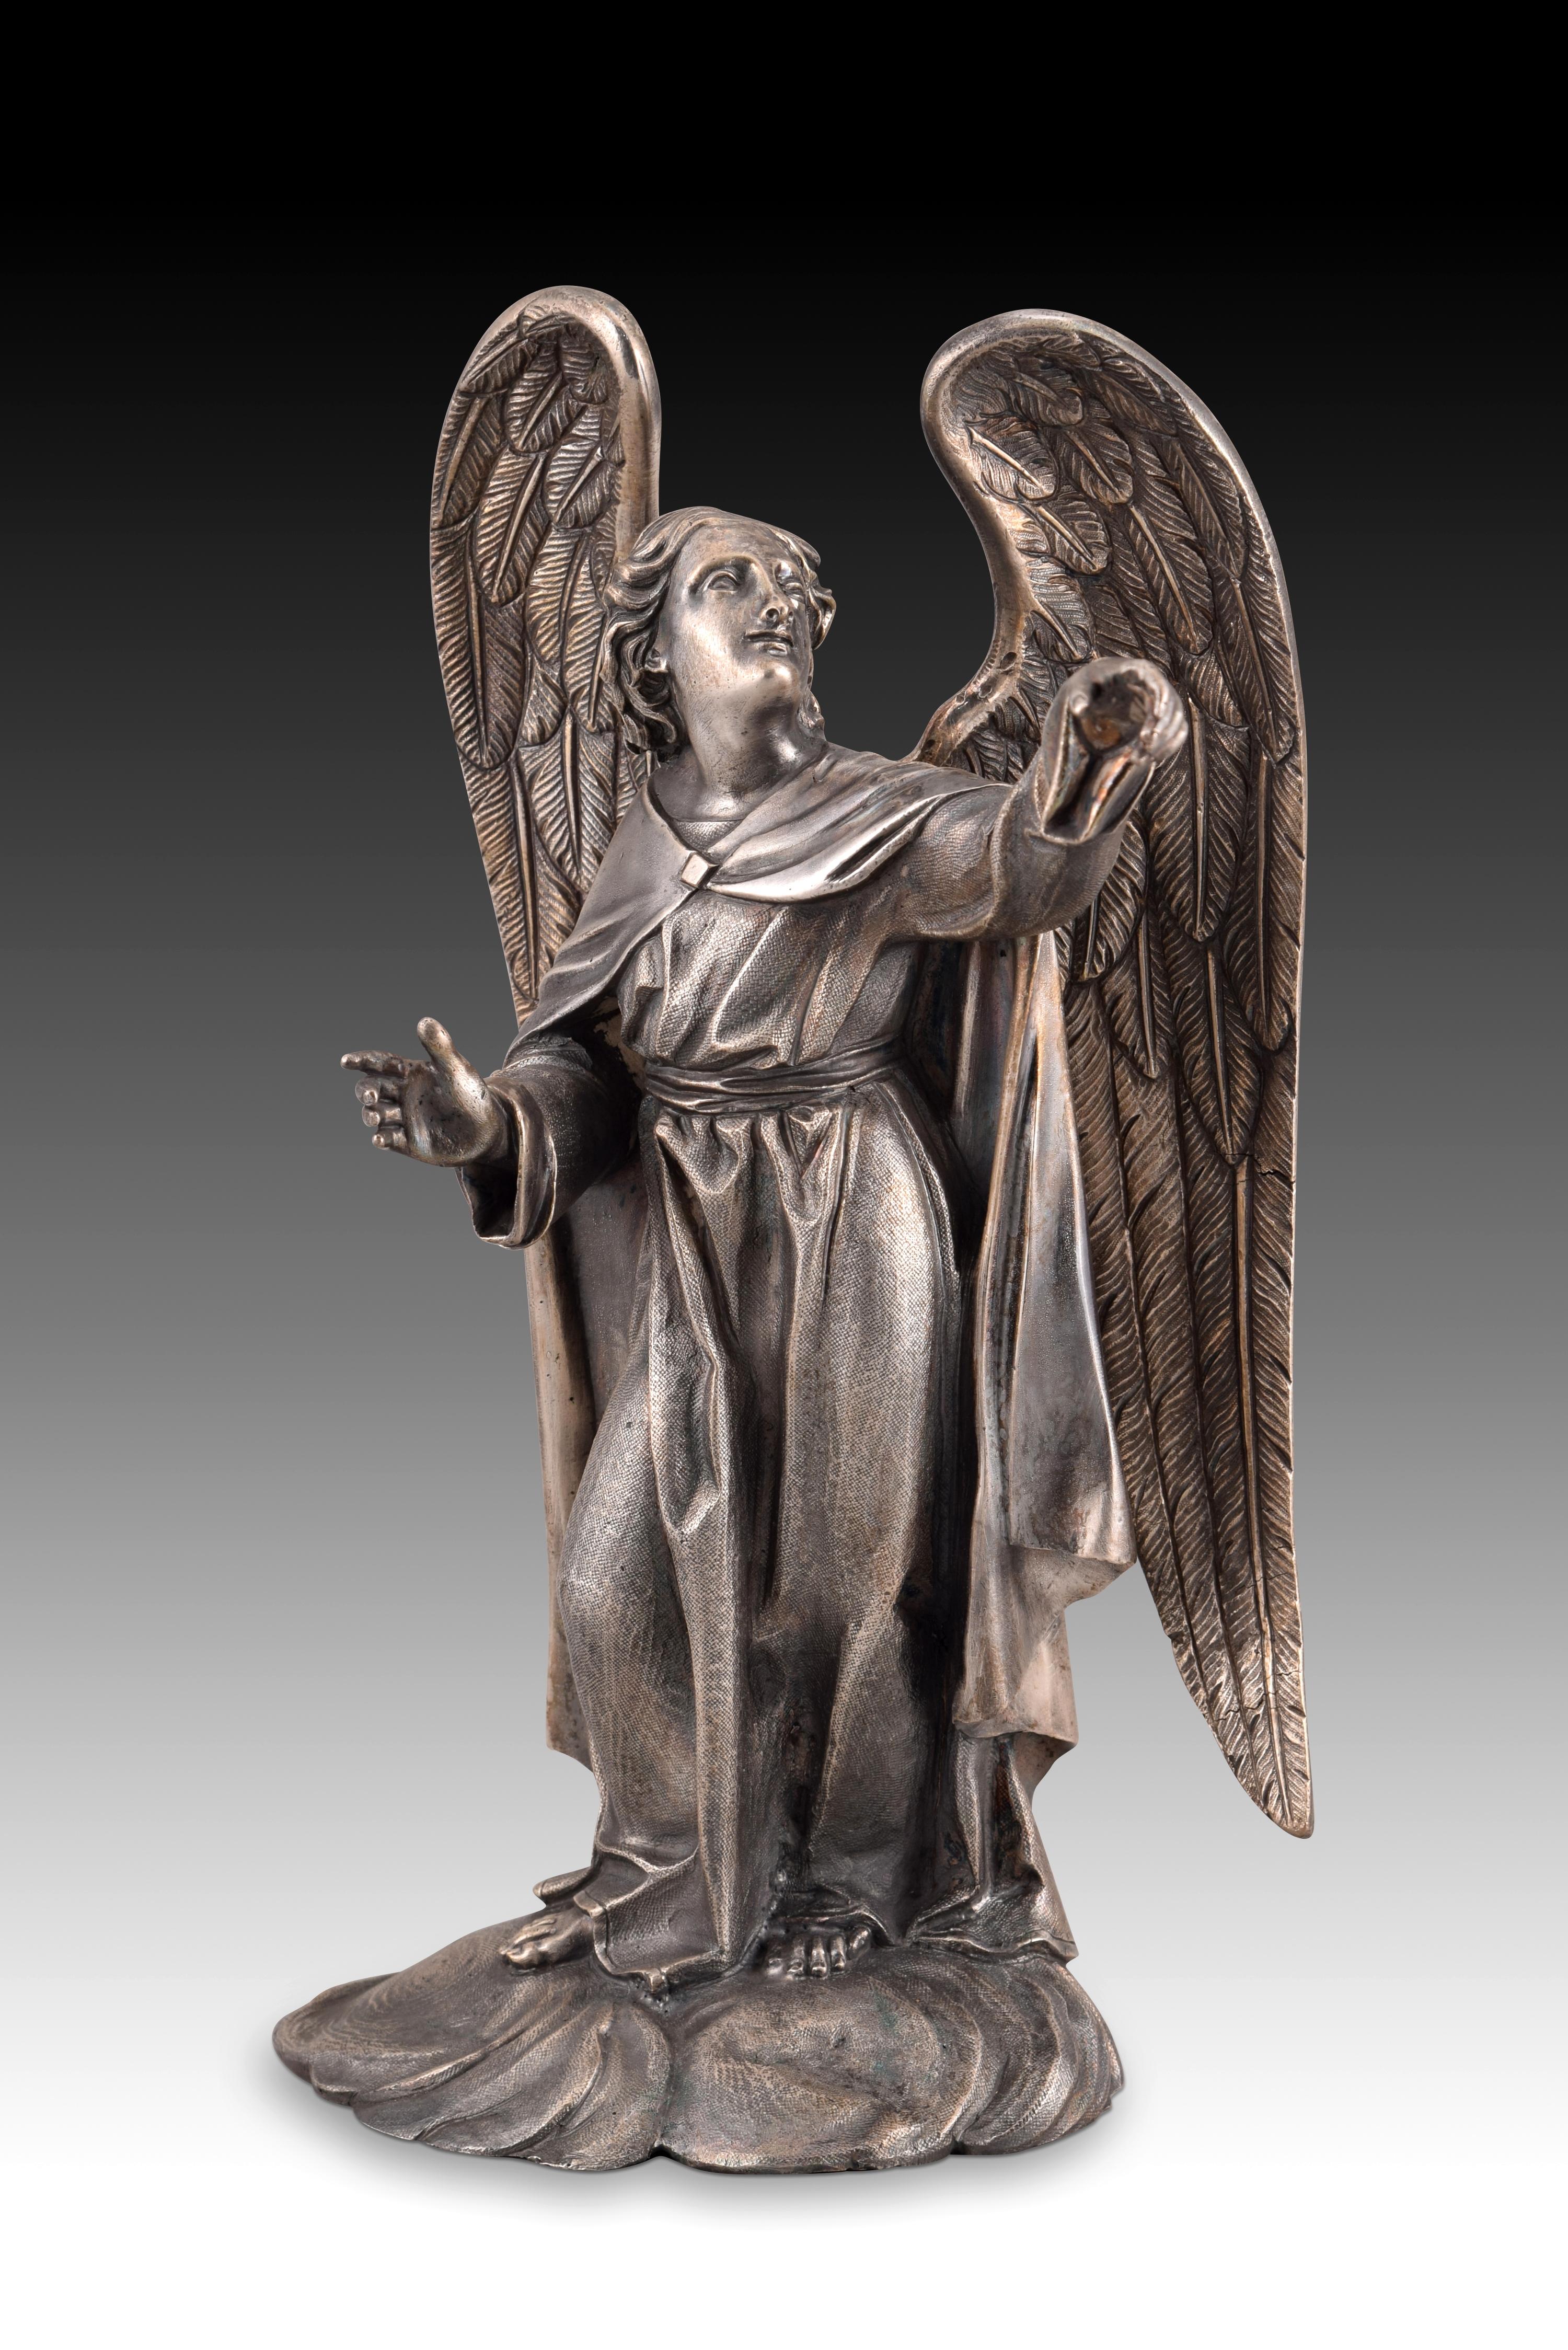 Angel. Metal in silver finish. XIX century. 
Angel or archangel figure made of silver metal, and standing on a base that resembles clouds. These types of sculptures were common in the 19th century both for churches and for personal altars, alone